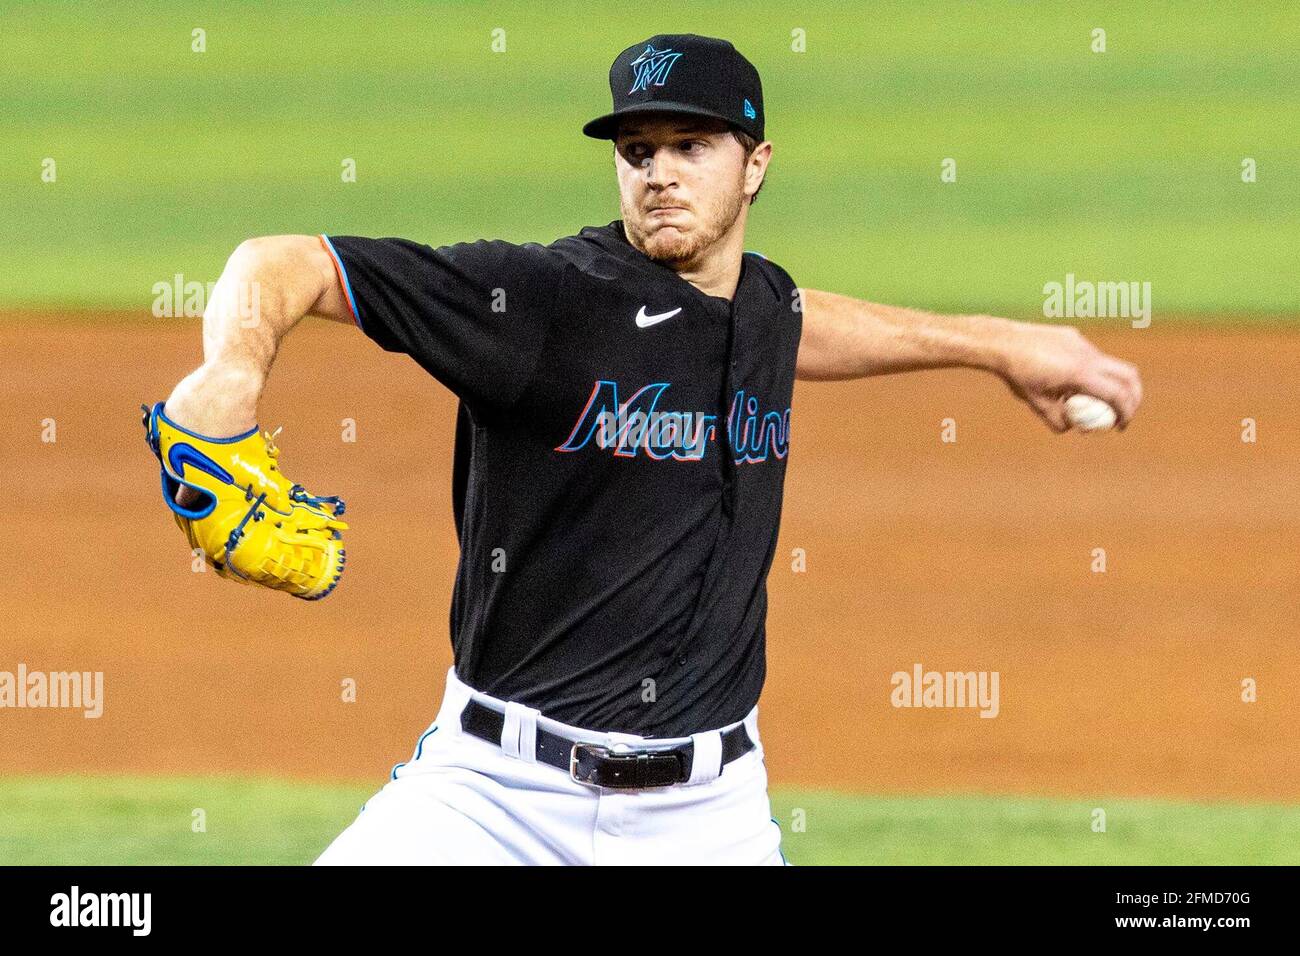 Miami Marlins pitcher Trevor Rogers (28) pitches during the third